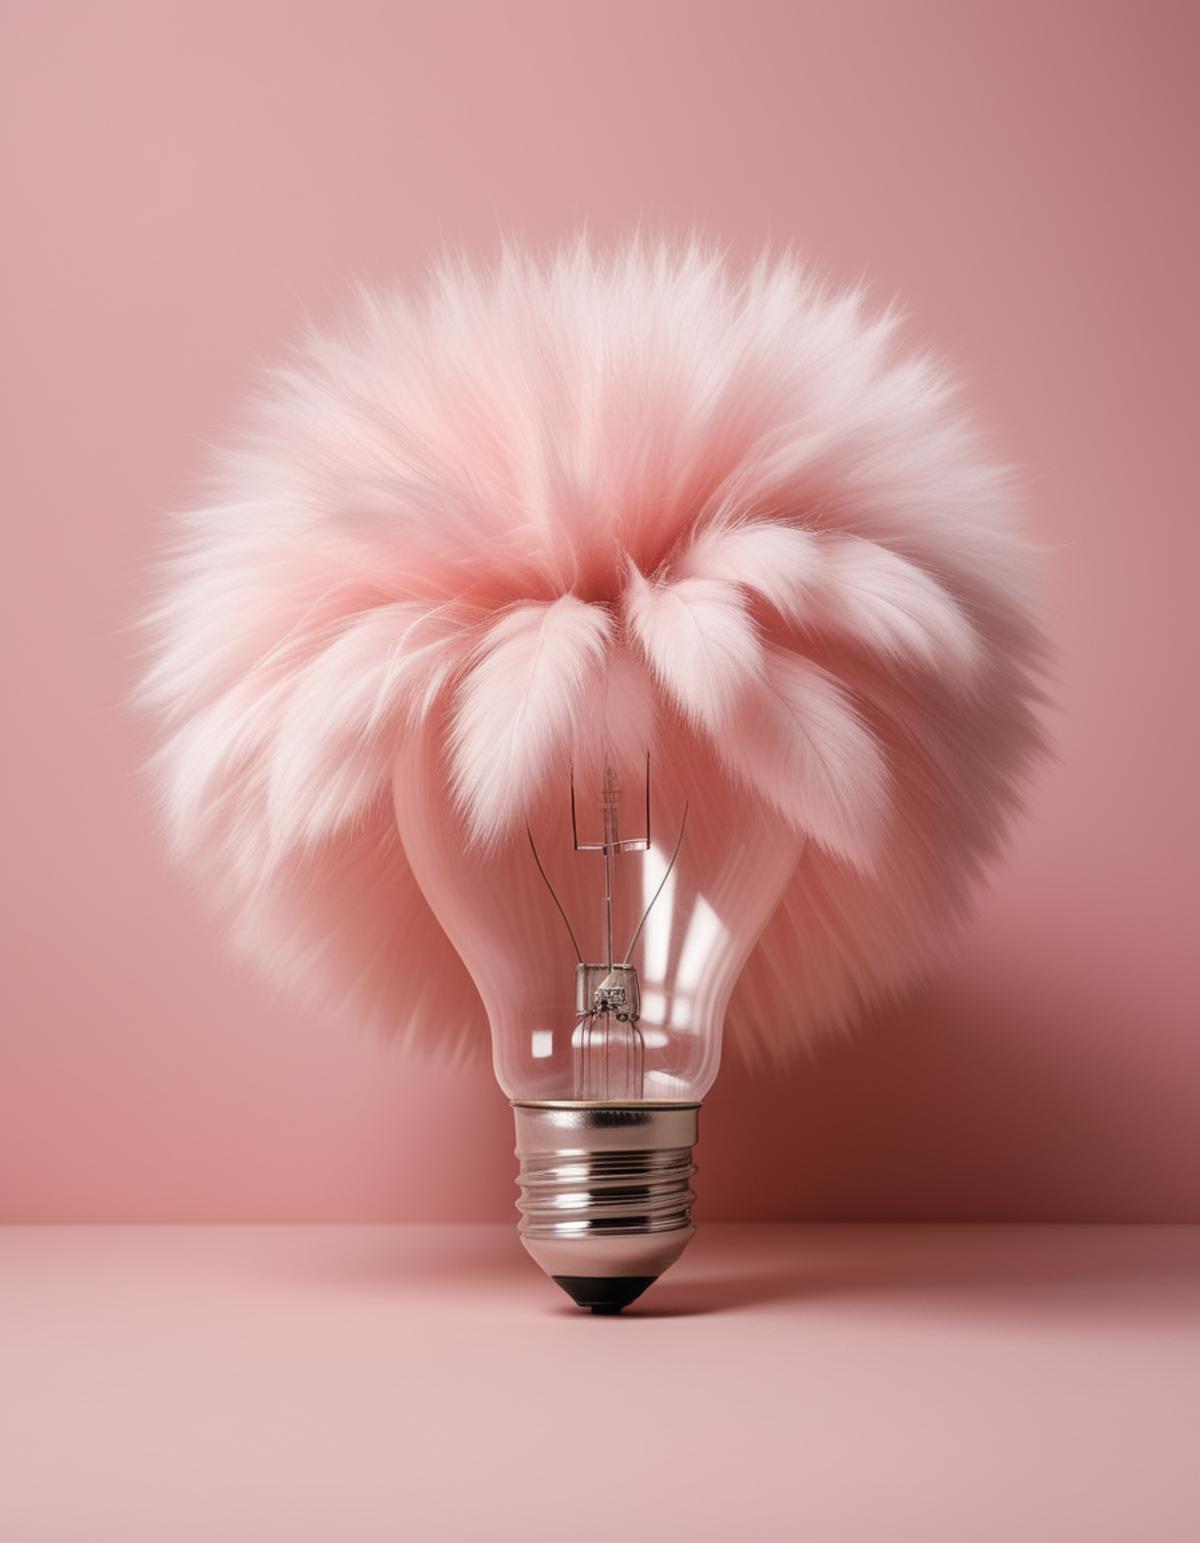 A light bulb with a pink fuzzy cover.